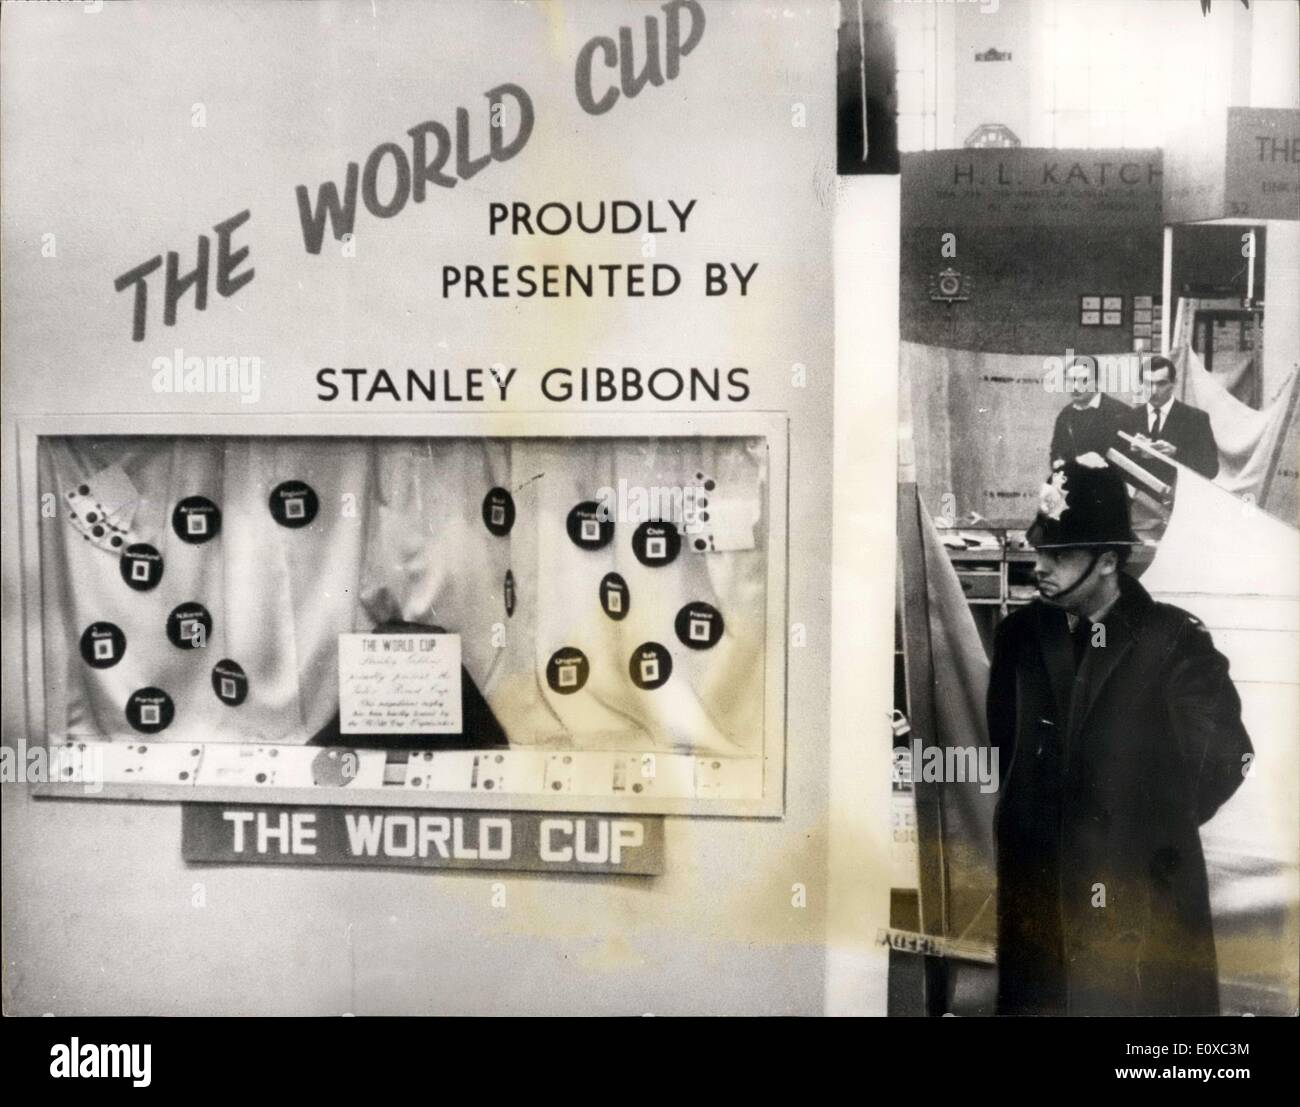 Mar. 21, 1966 - The World Cup Stolen: The famous World Cup was yesterday stolen from the Central Hall, Westminster, where it was on show at the National Stamp Exhibition. Photo shows A policeman stands guard last night over the display case in which the World Cup stood before it was stolen. Stock Photo